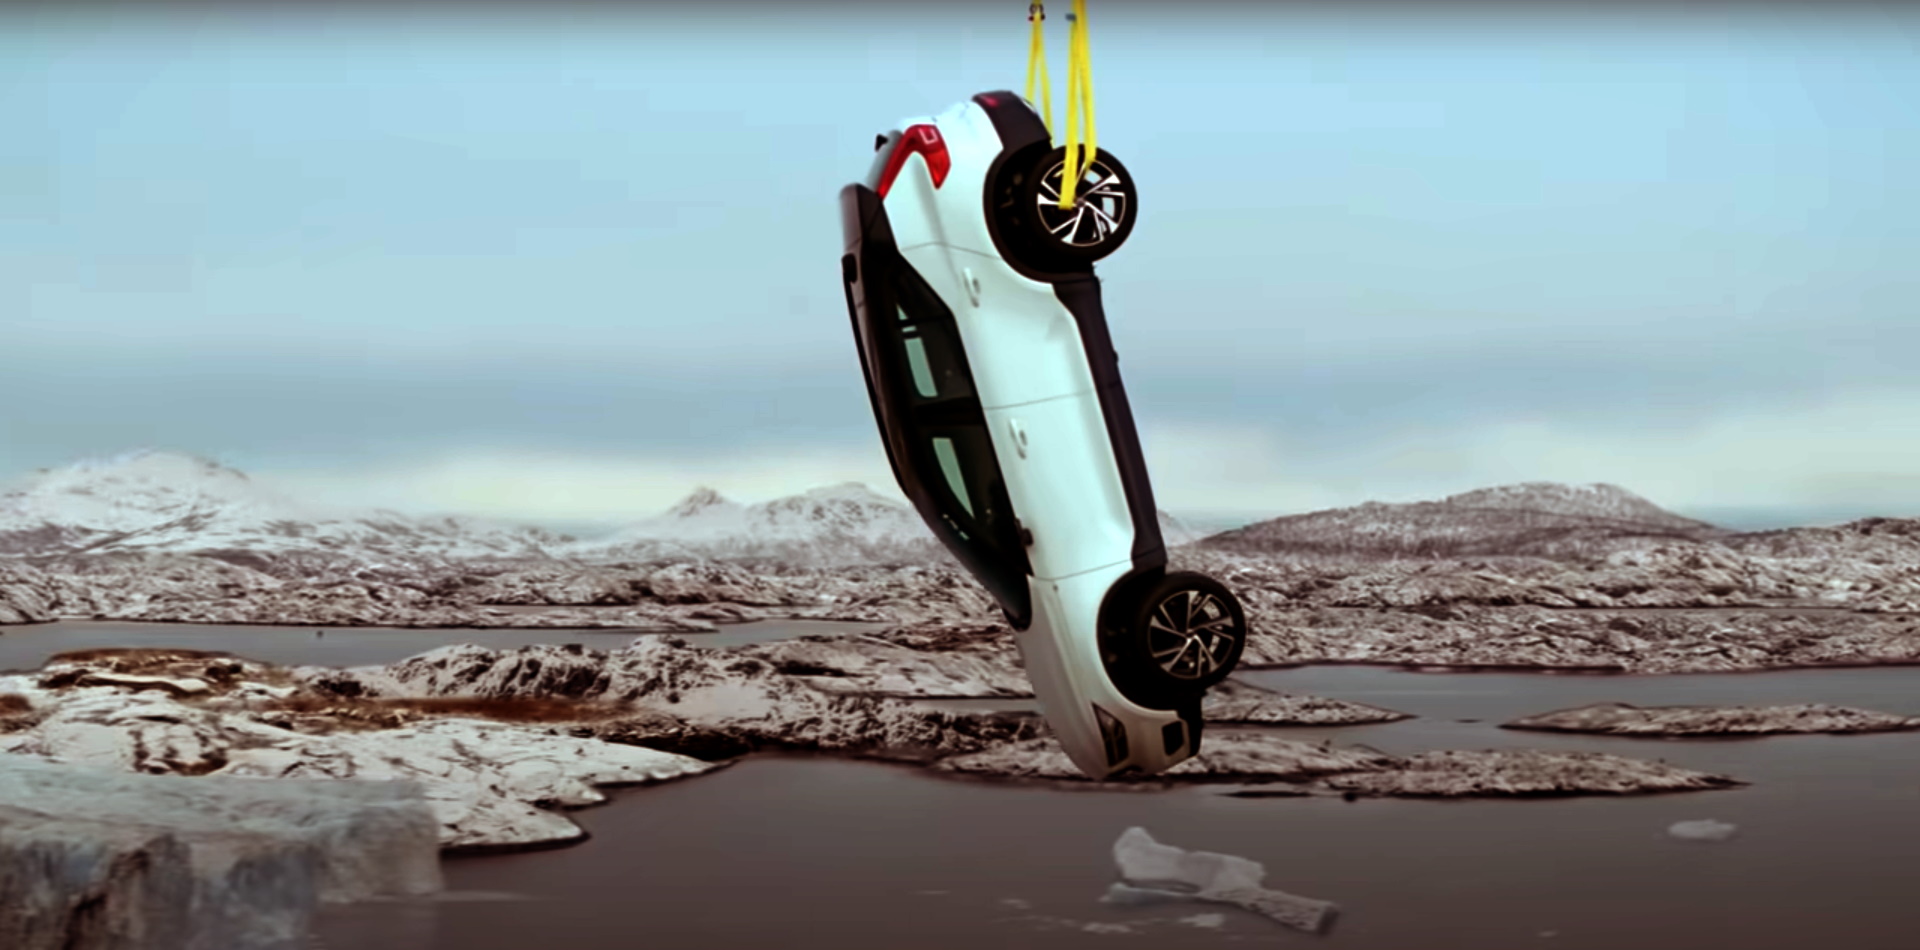 Volvo "The ultimate safety test"